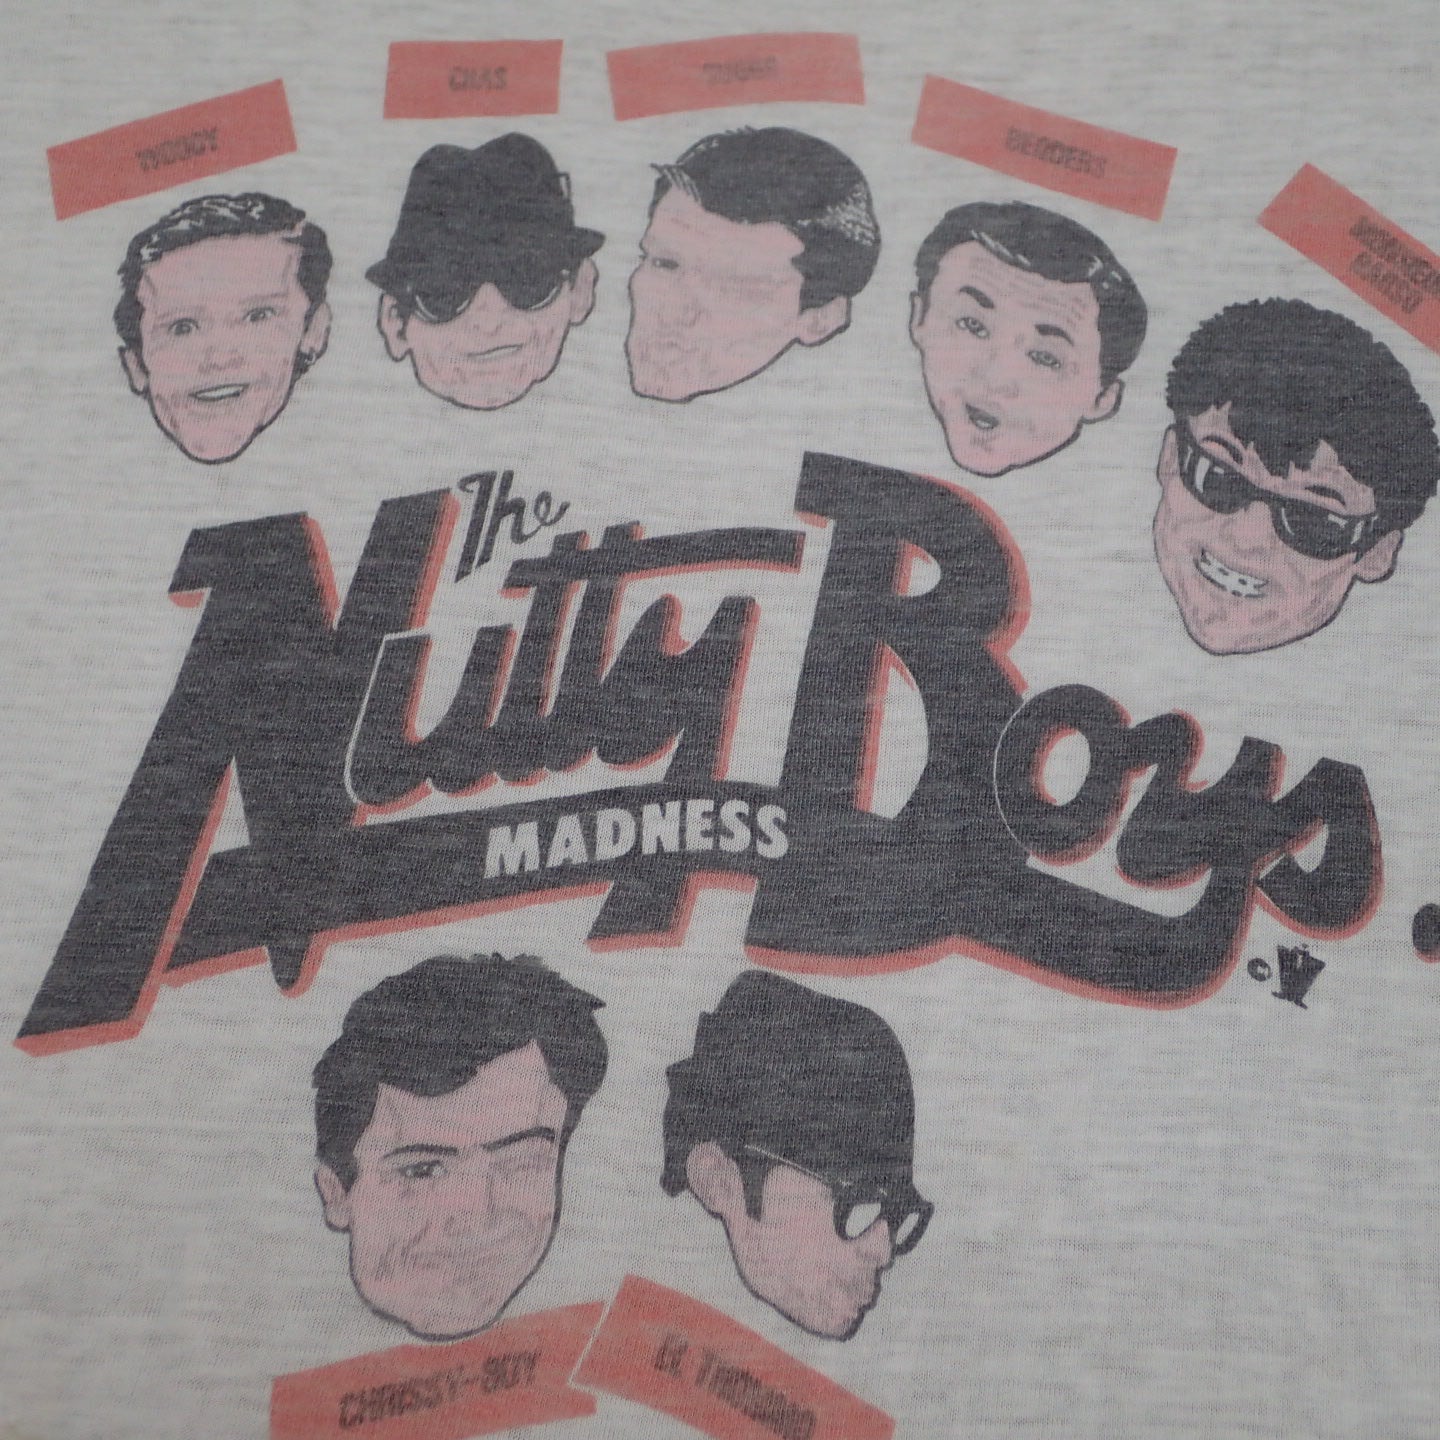 80s Madness " The Nutty Boys Tee"